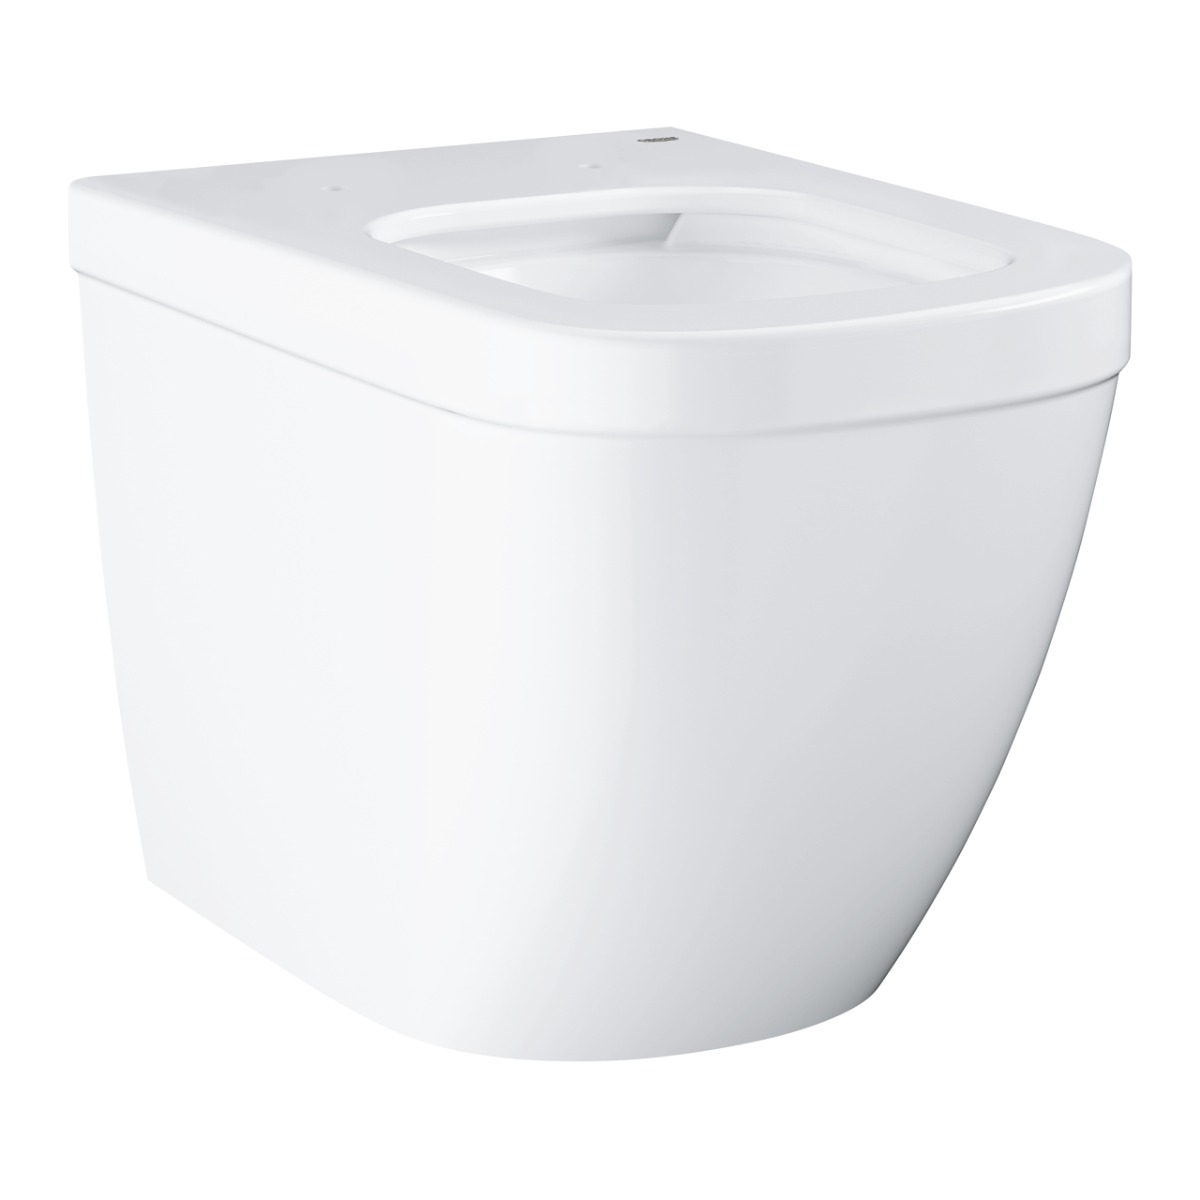 EURO CERAMIC FLOOR STANDING BACK TO WALL WC